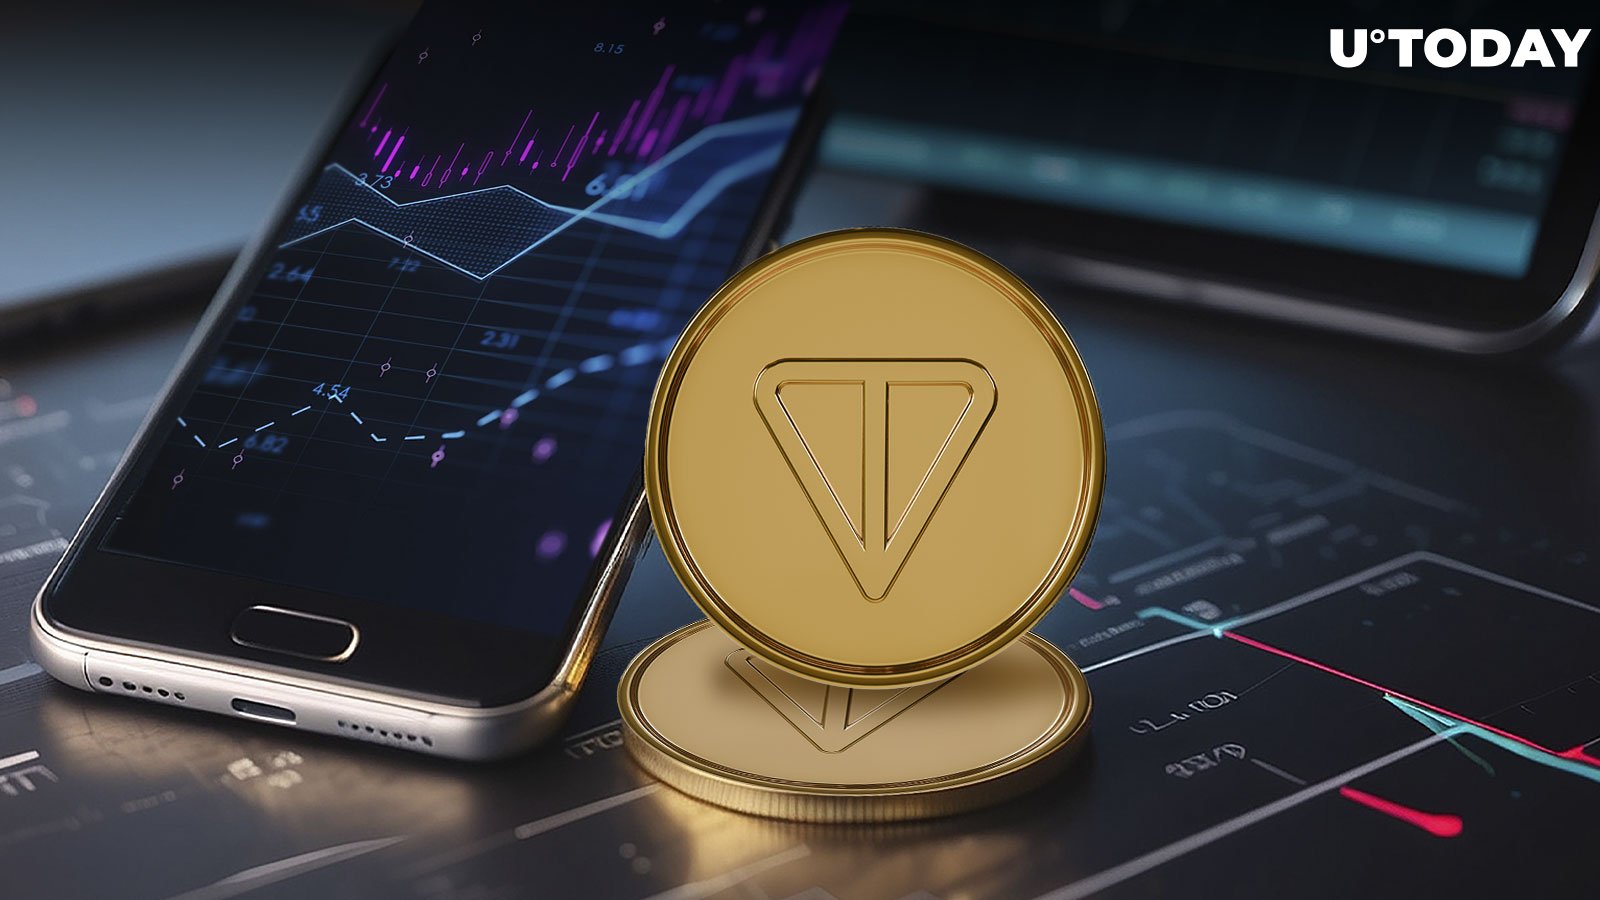 Toncoin (TON) Skyrockets 170% in Volume, What's Going On?